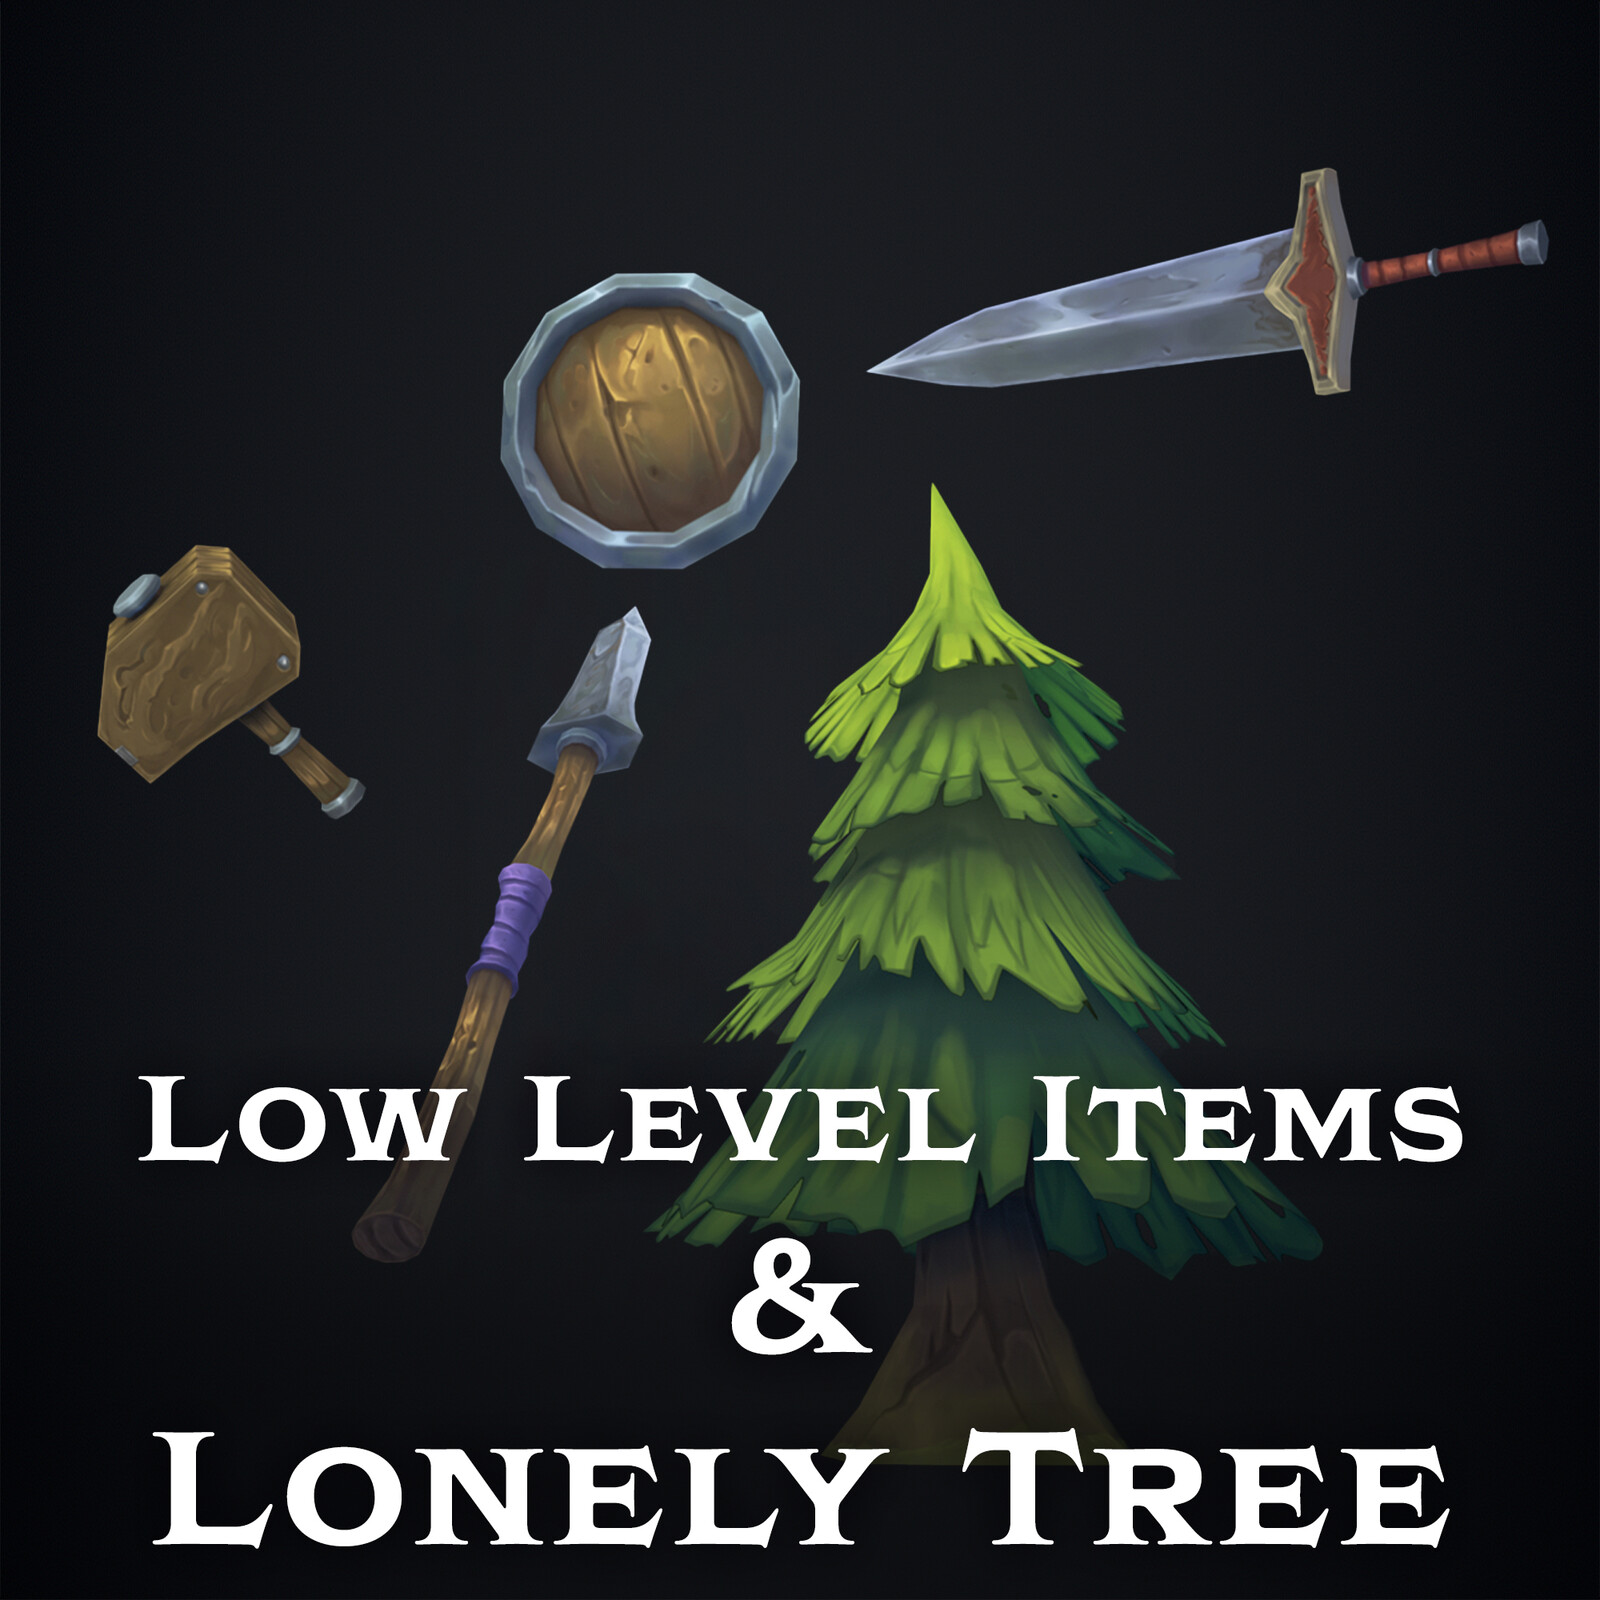 Low Level Items and Lonely Tree | Stylized Hand Painted Items